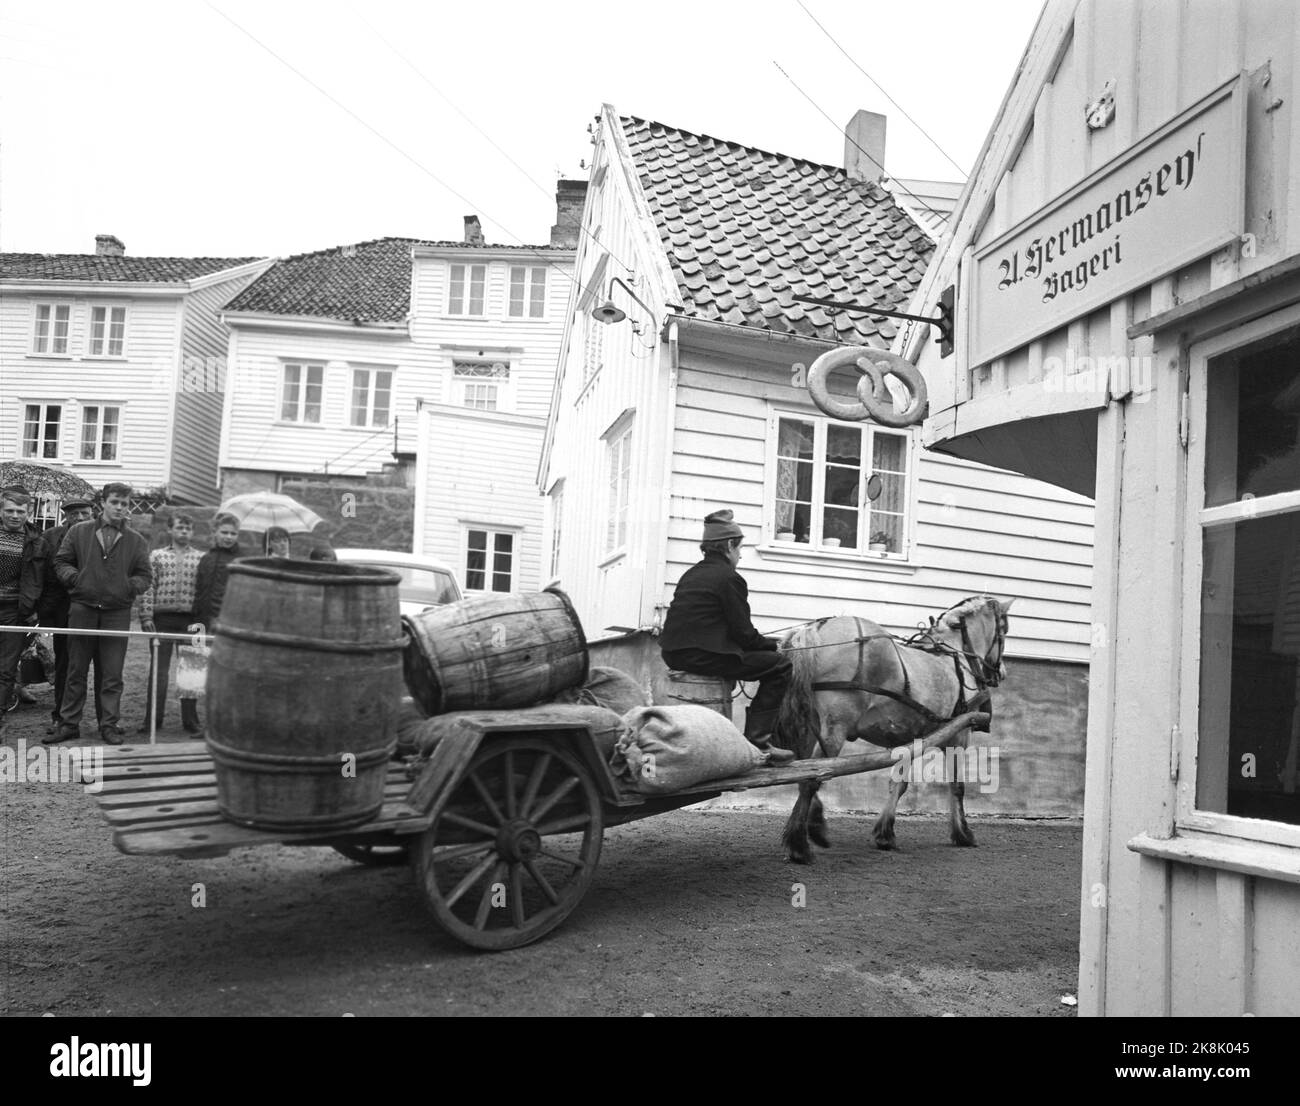 Skudeneshavn June 1967. The filming of 'Skipper Worse' was filmed in 'Søragadå' in Skudeneshavn, which has old farm houses and seahouses from the 18th century that is just as untouched to this day. The television theater will broadcast five hours of film about skipper Worse. Here we see horses with carts loaded with barrels drive through the narrow streets. Signs on the house wall 'Hermansen bakery' and a large pastry. Photo: Sverre A. Børretzen / Current / NTB Stock Photo